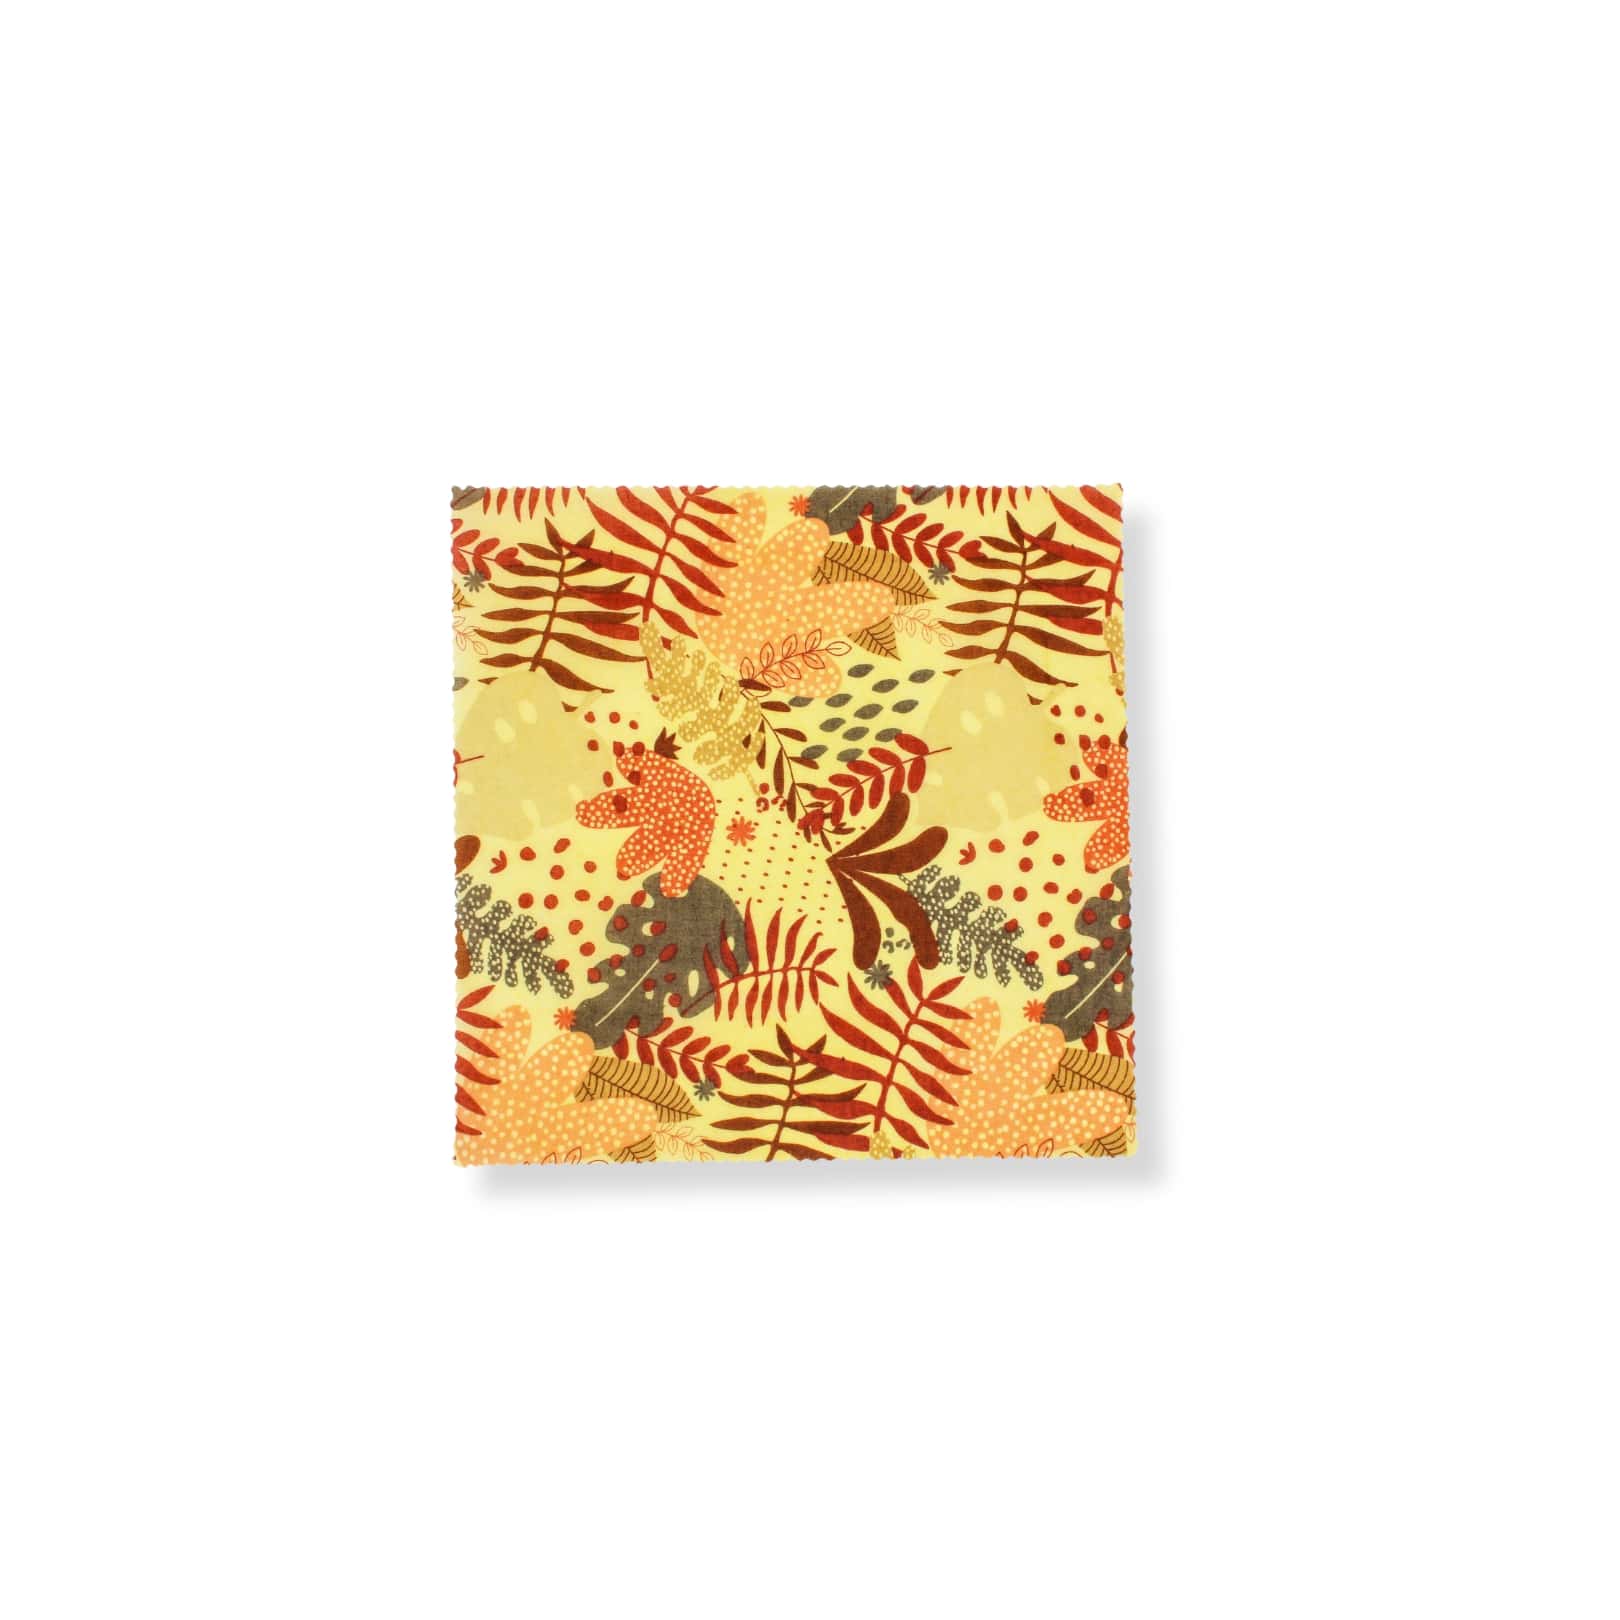 Beeswax Food Wraps - Single Small - The Plastic Free Co.